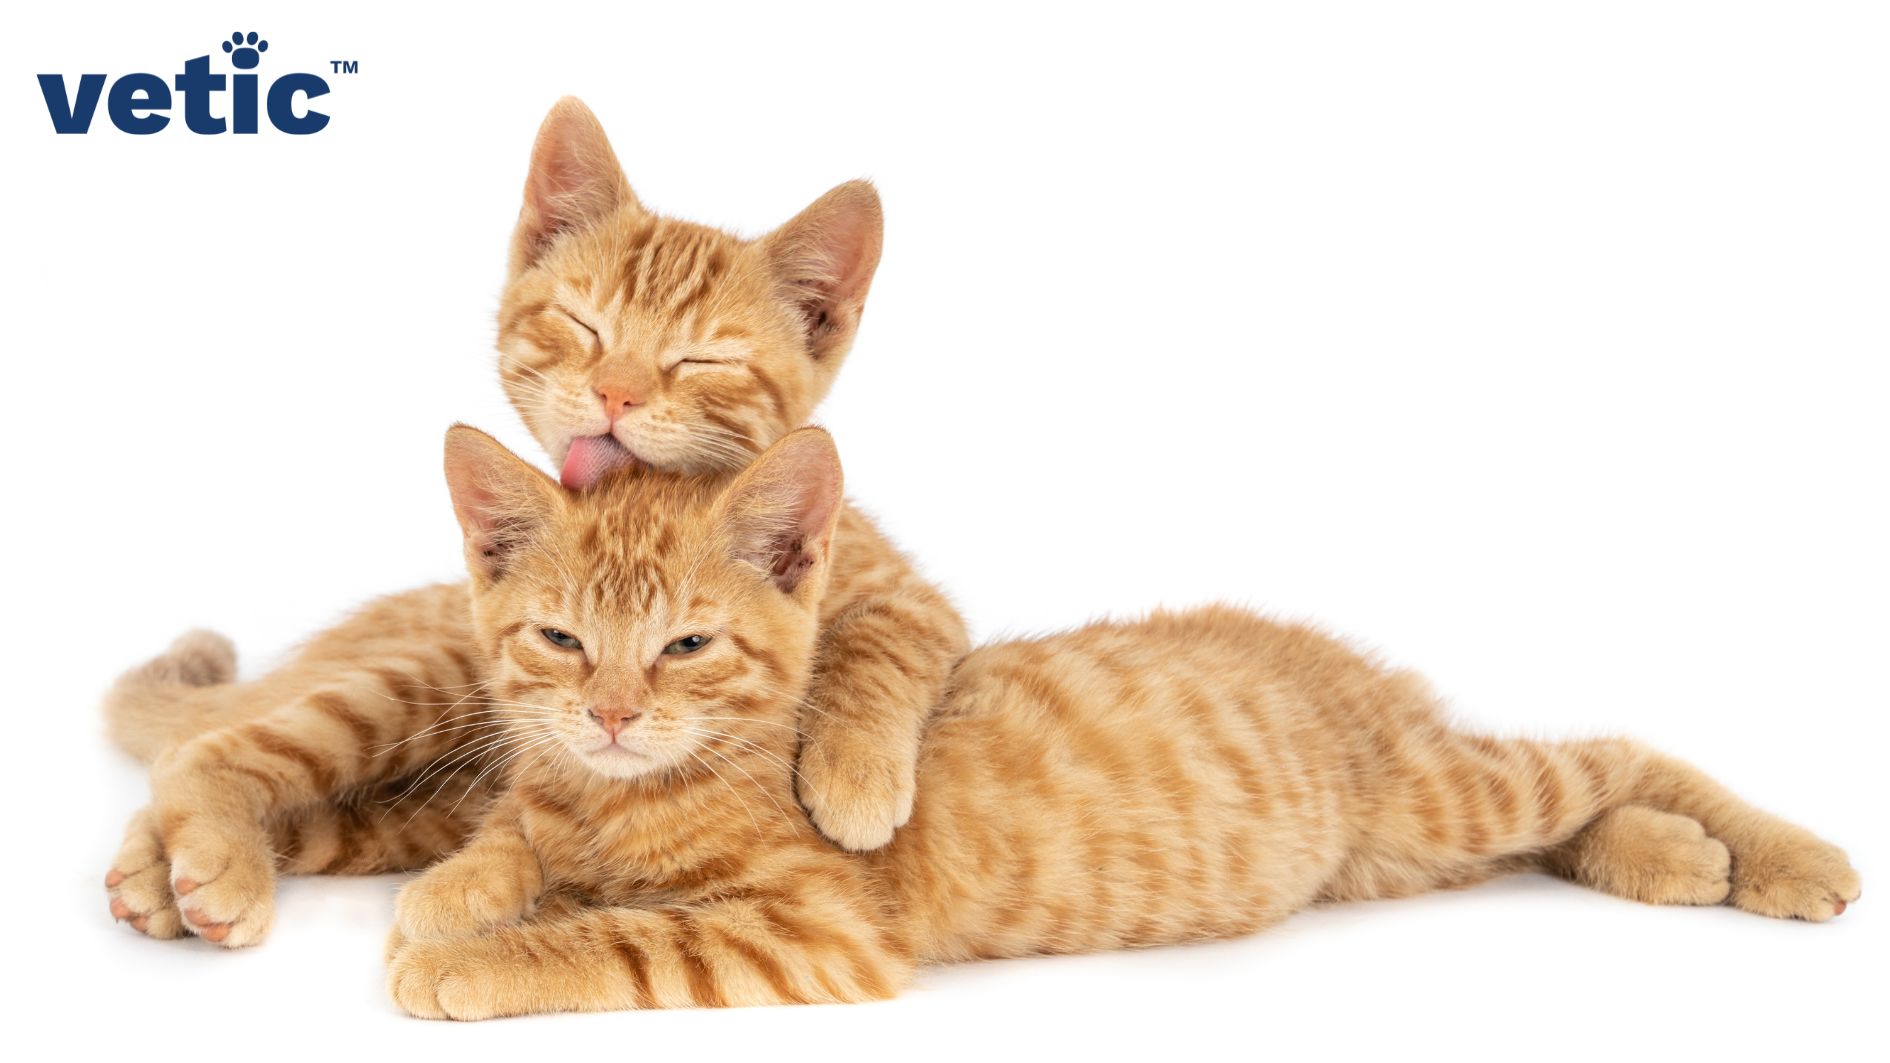 Two orange tabby kittens lying side by side. One is licking the other. they are each around 3 months old. They will reach sexual maturity within another 30-45 days and 4 to 6 months may be the ideal time for neutering cats